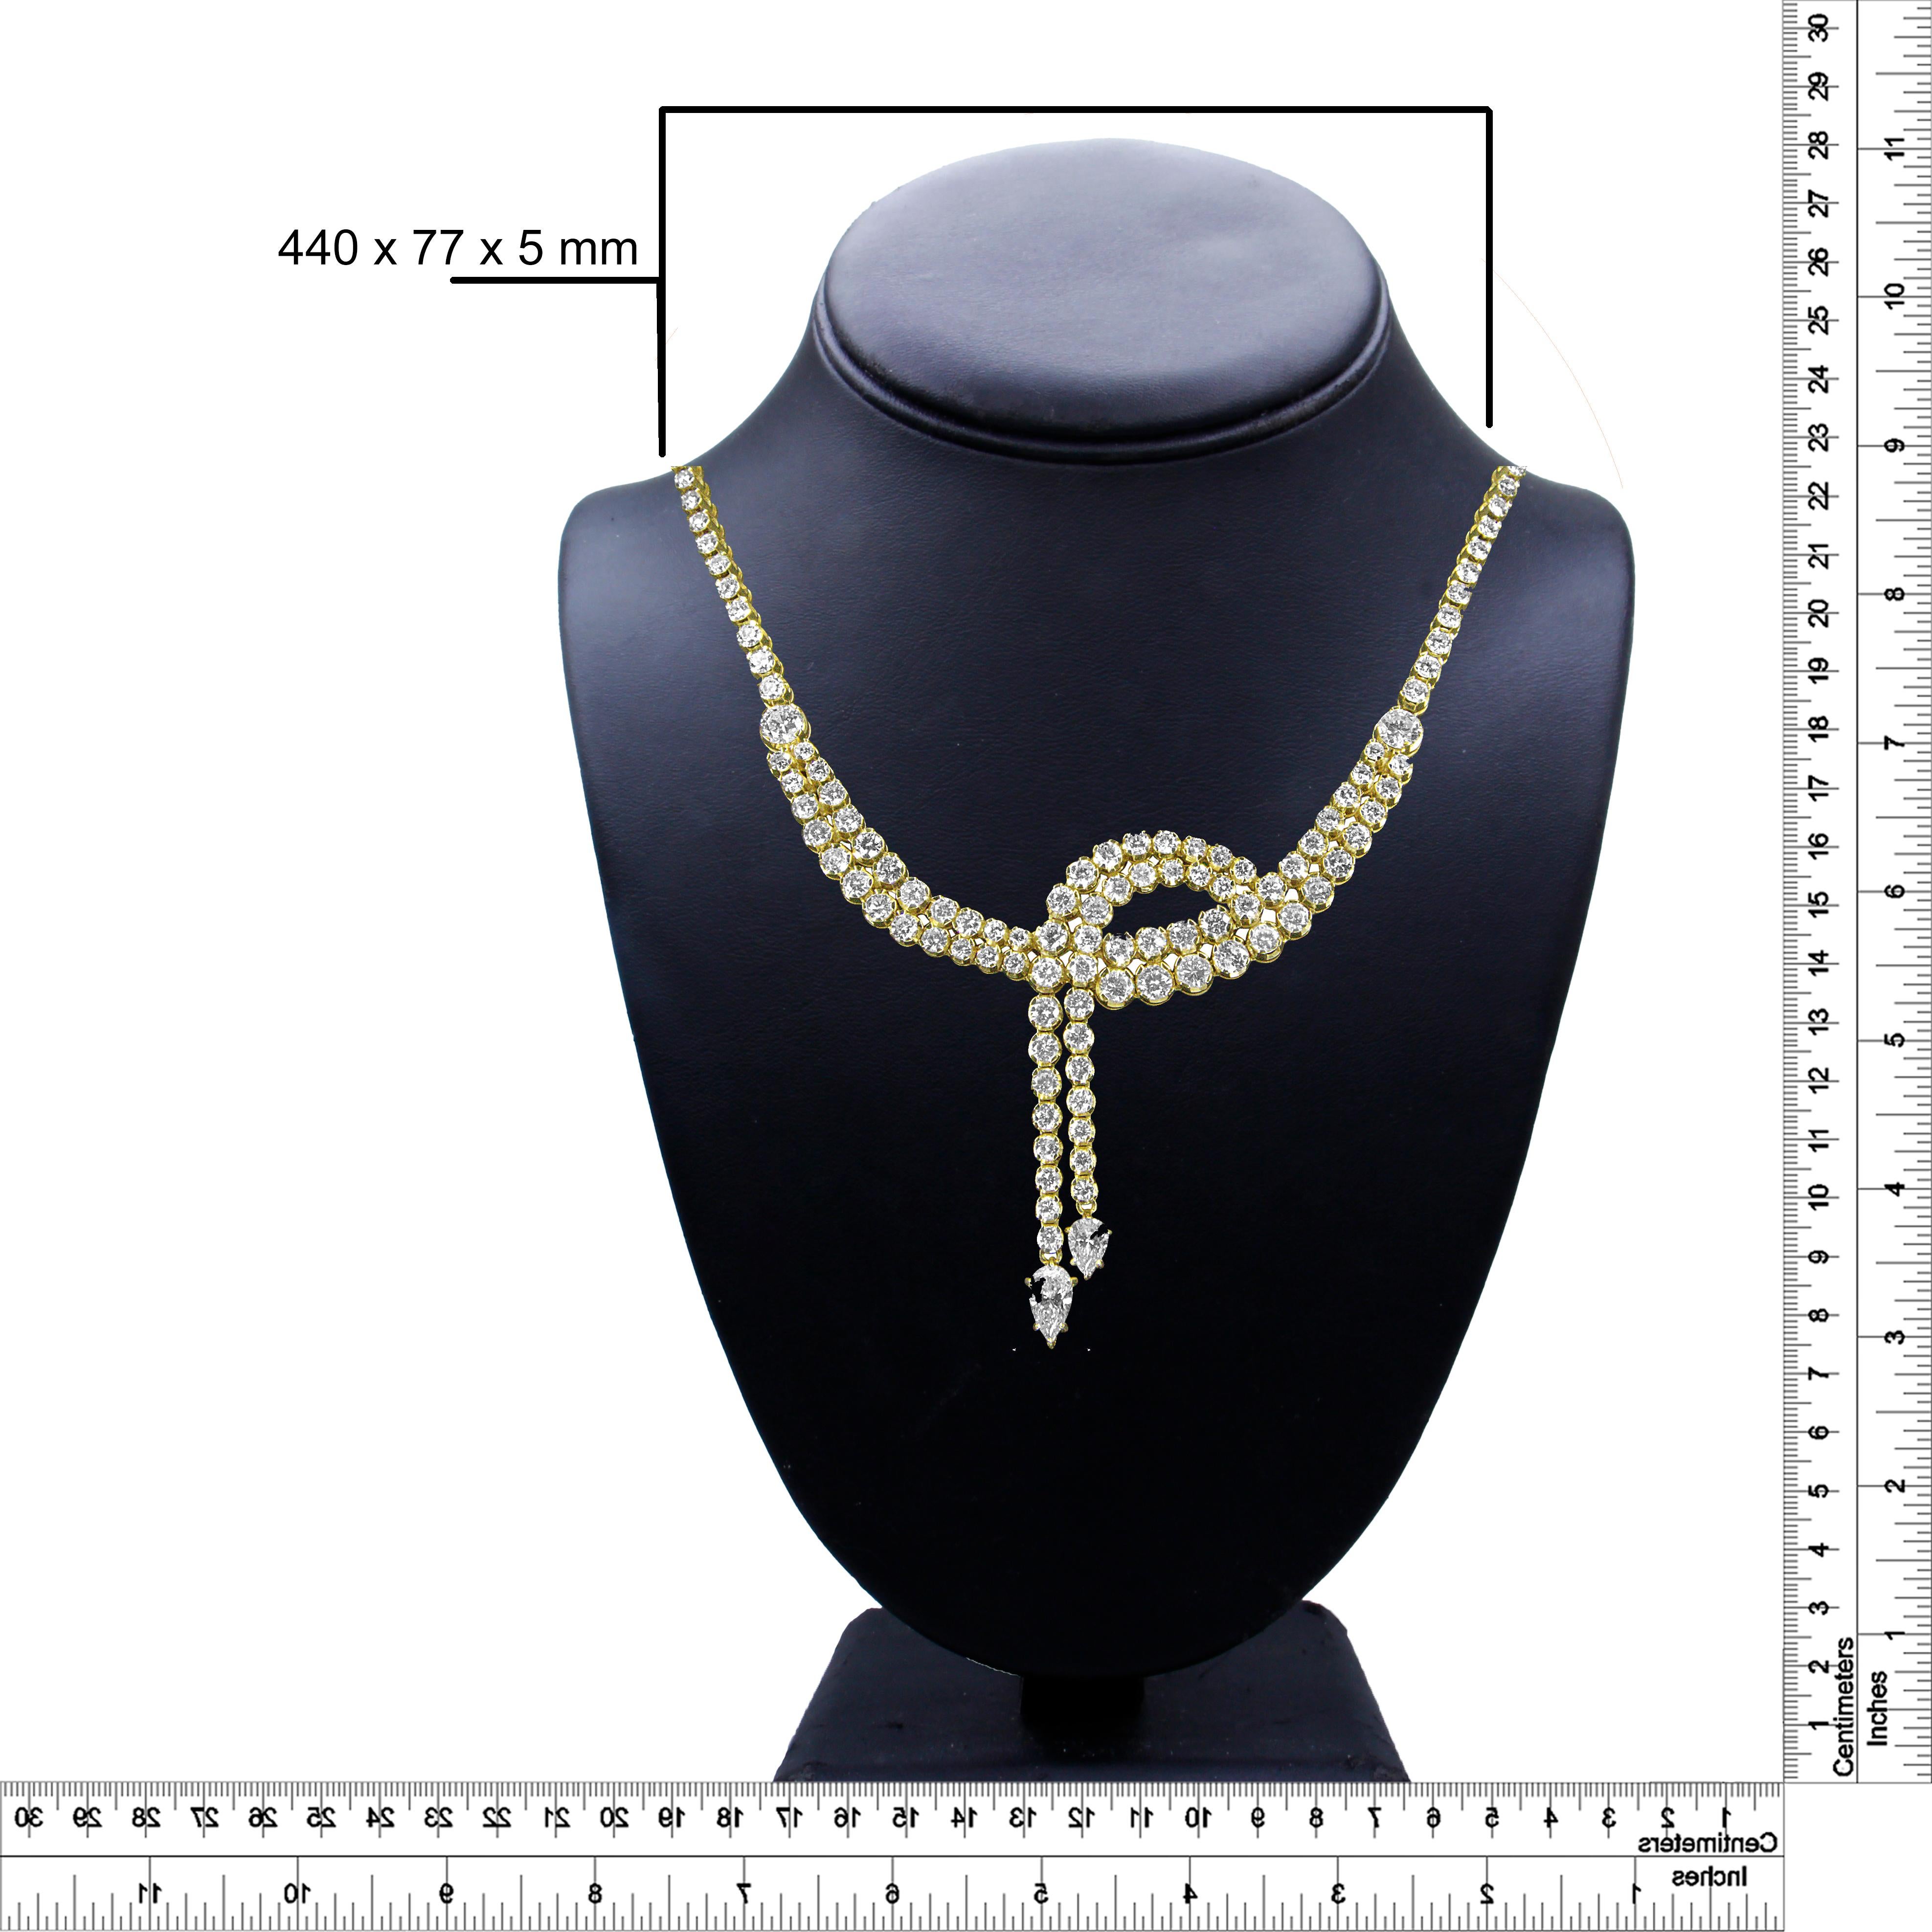 Contemporary 14K Yellow Gold 17.0 Carat Diamond Double Row Lariat Tennis Necklace For Sale